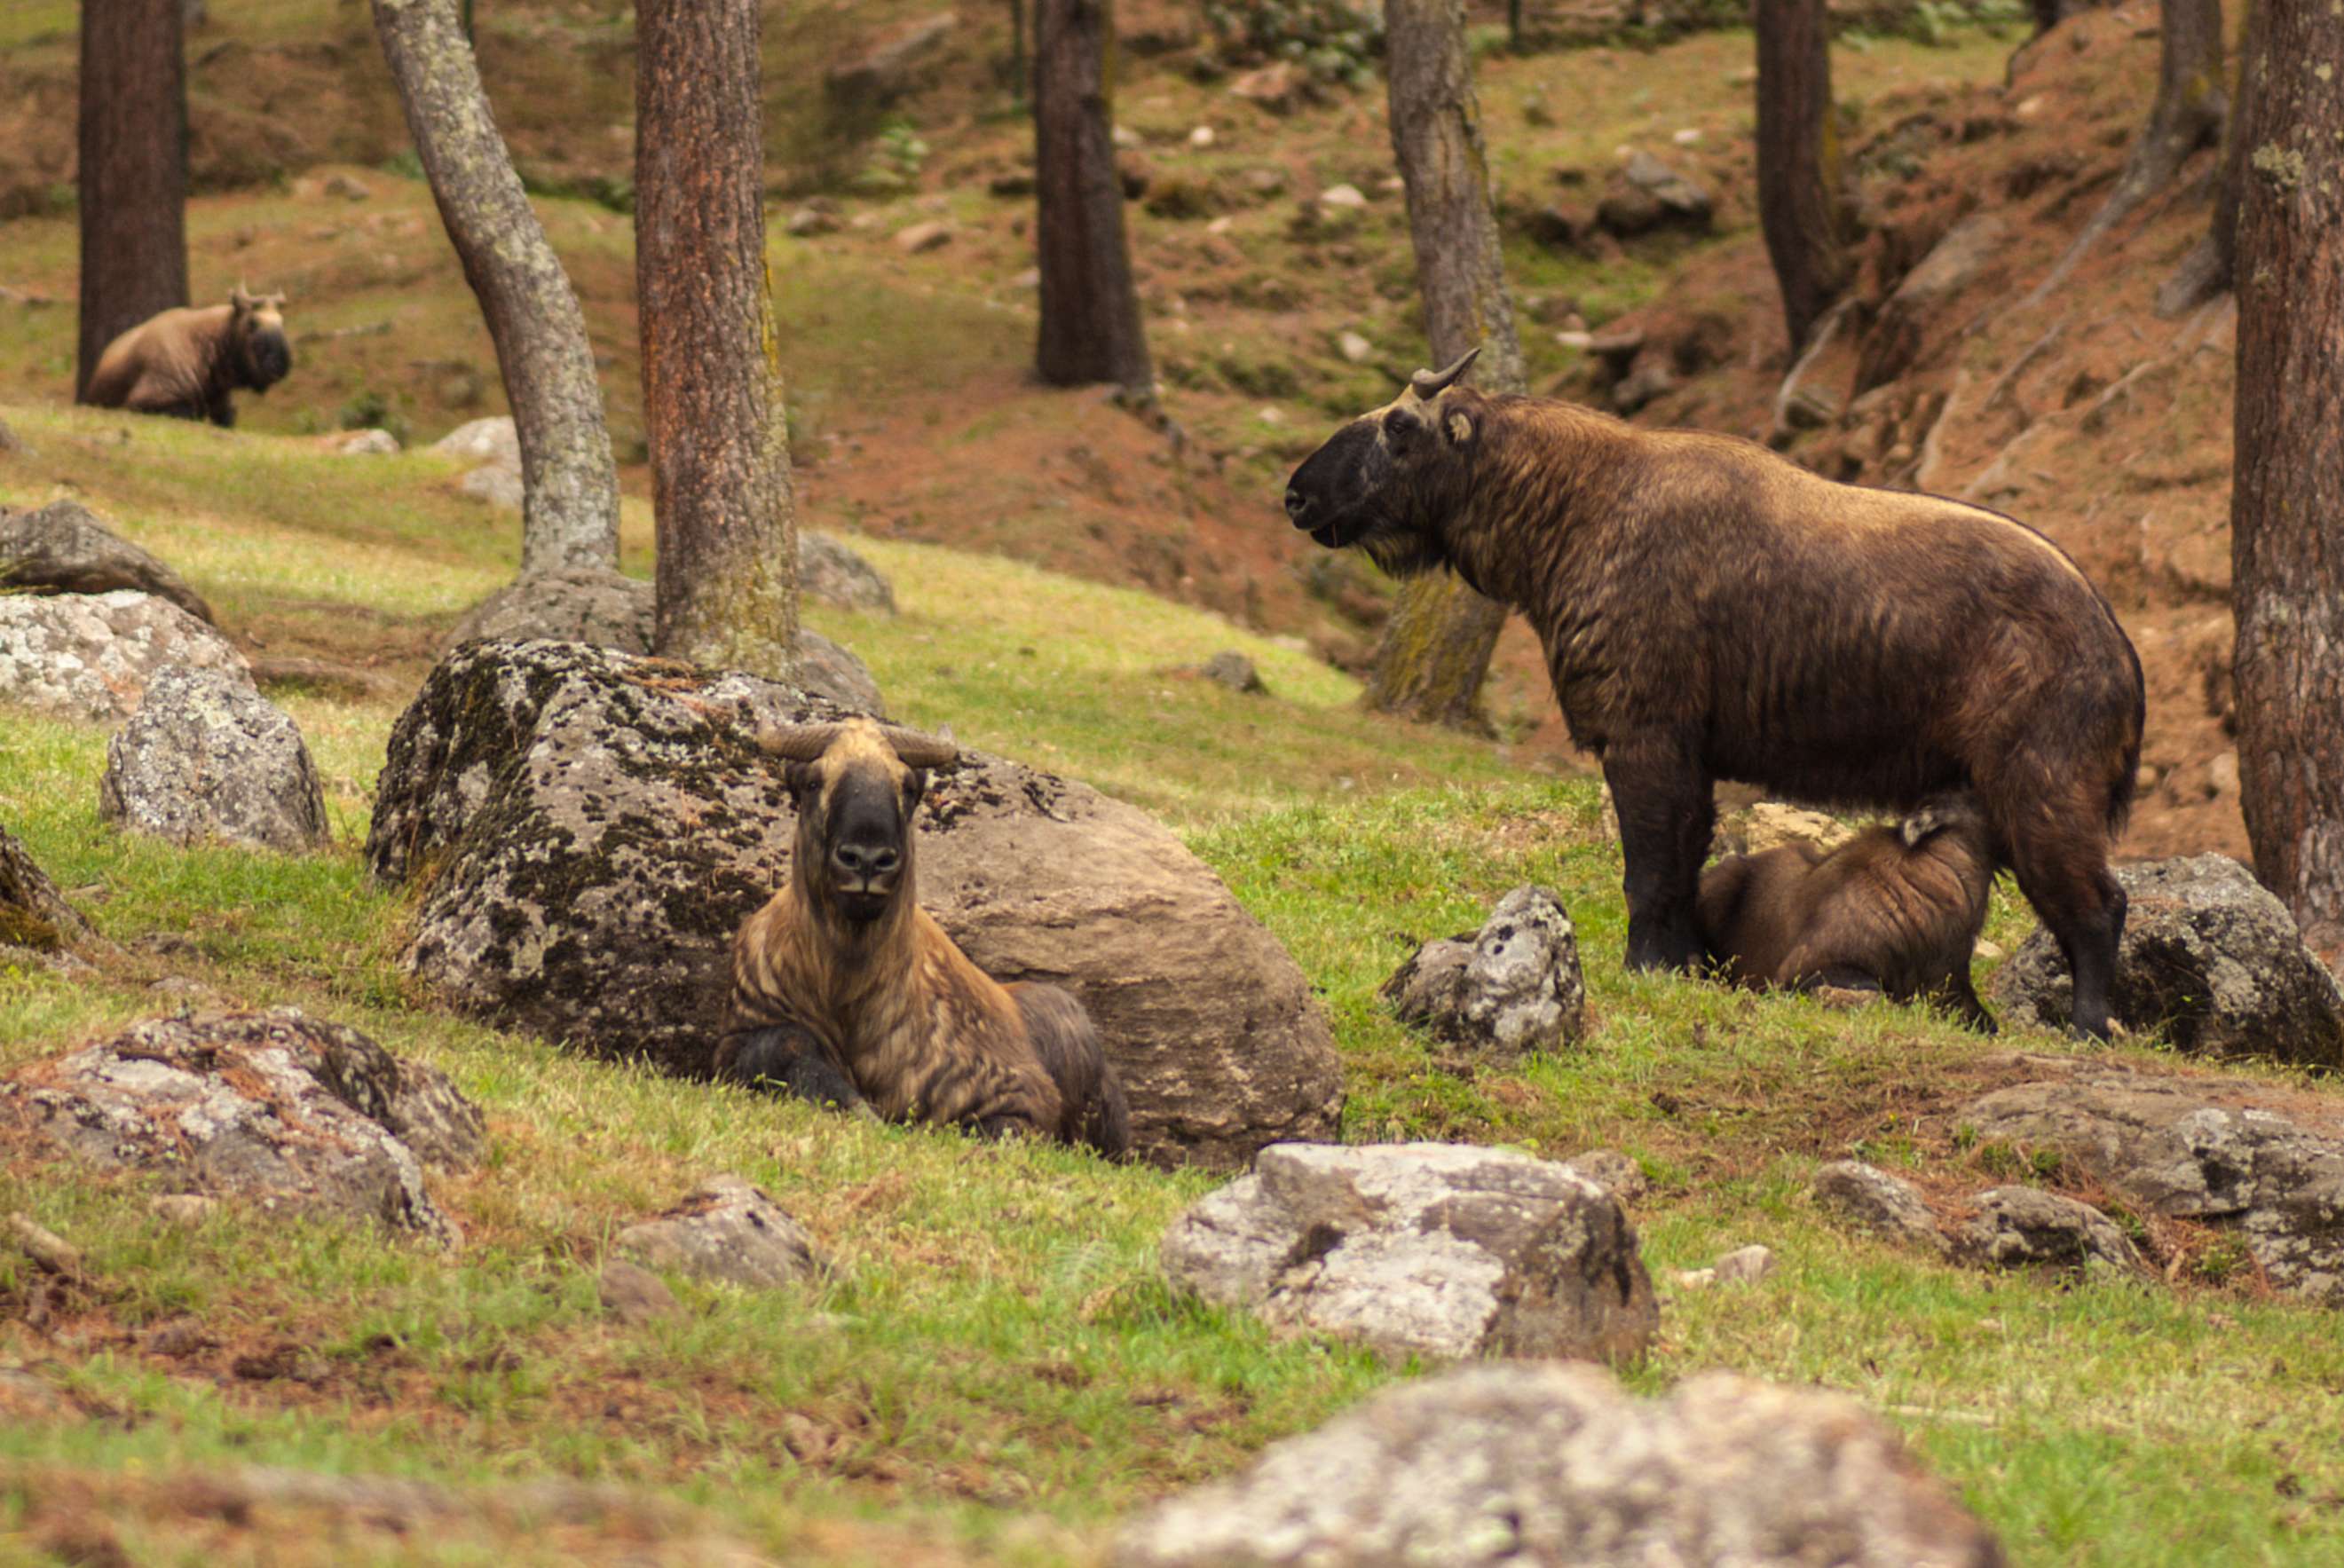 The takin (Budorcas taxicolor whitei), Bhutan’s national animal, is most closely related to the Arctic musk ox. © Rachel Kramer